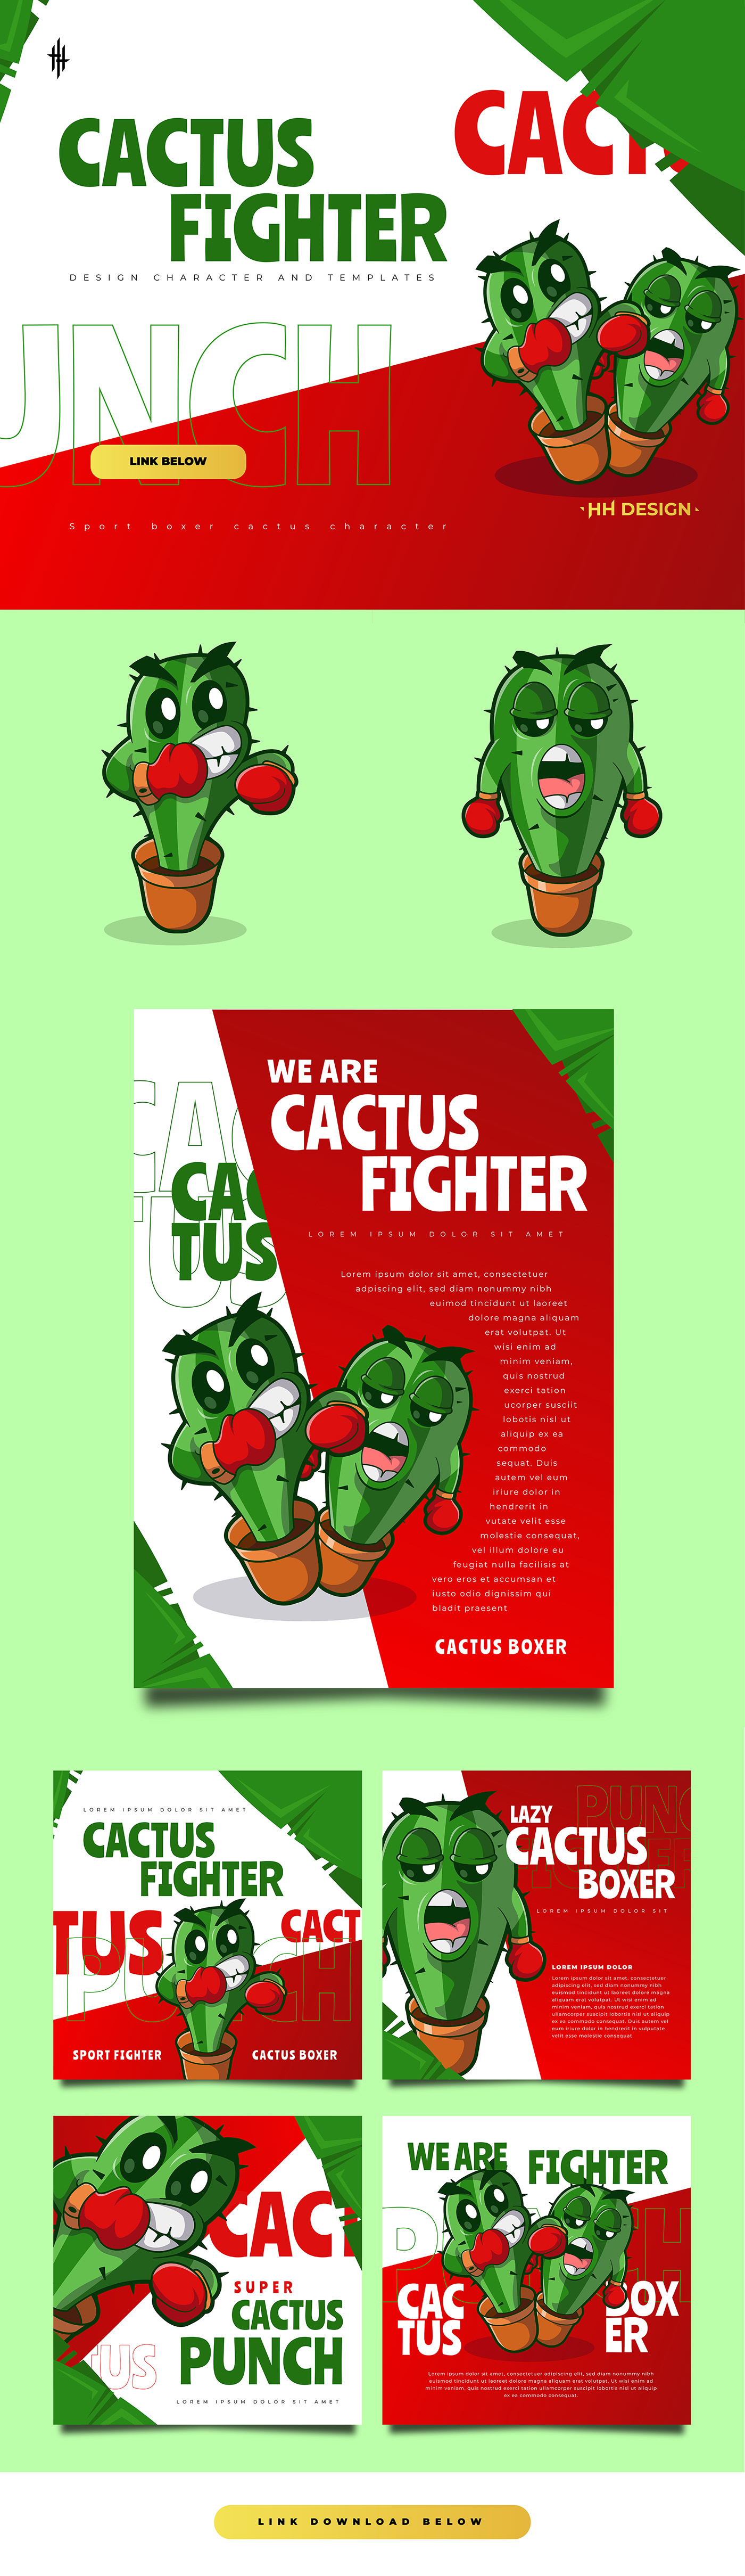 cactus Fighter Boxer green Plant social media flyer Character templates